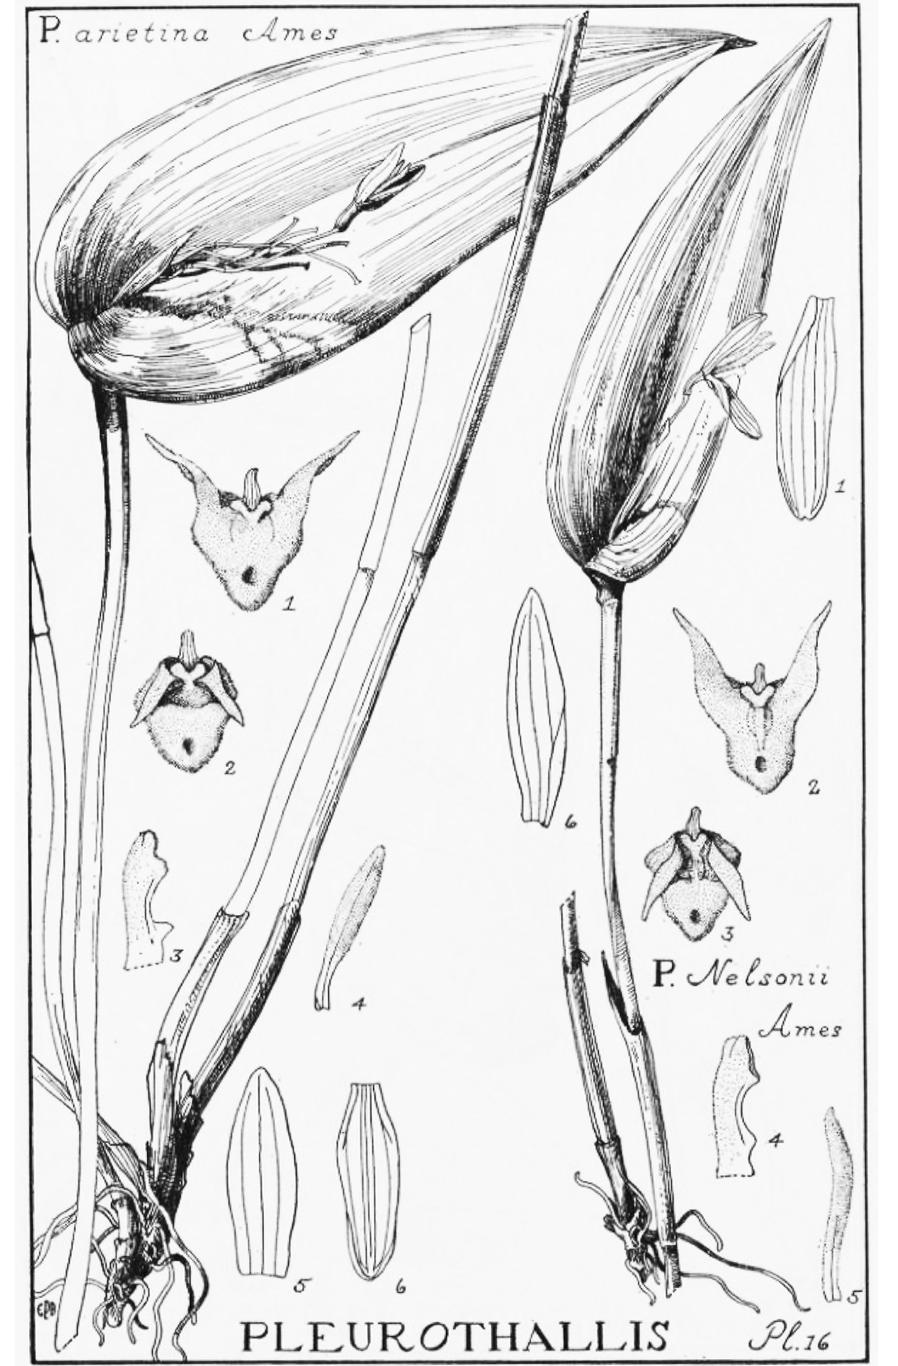 168 LANKESTERIANA Figure 3. Drawings of Pleurothallis arietina and Pleurothallis nelsonii (Ames 1923). crocodiliceps, as represented by Garay s tracing of the type (Fig.